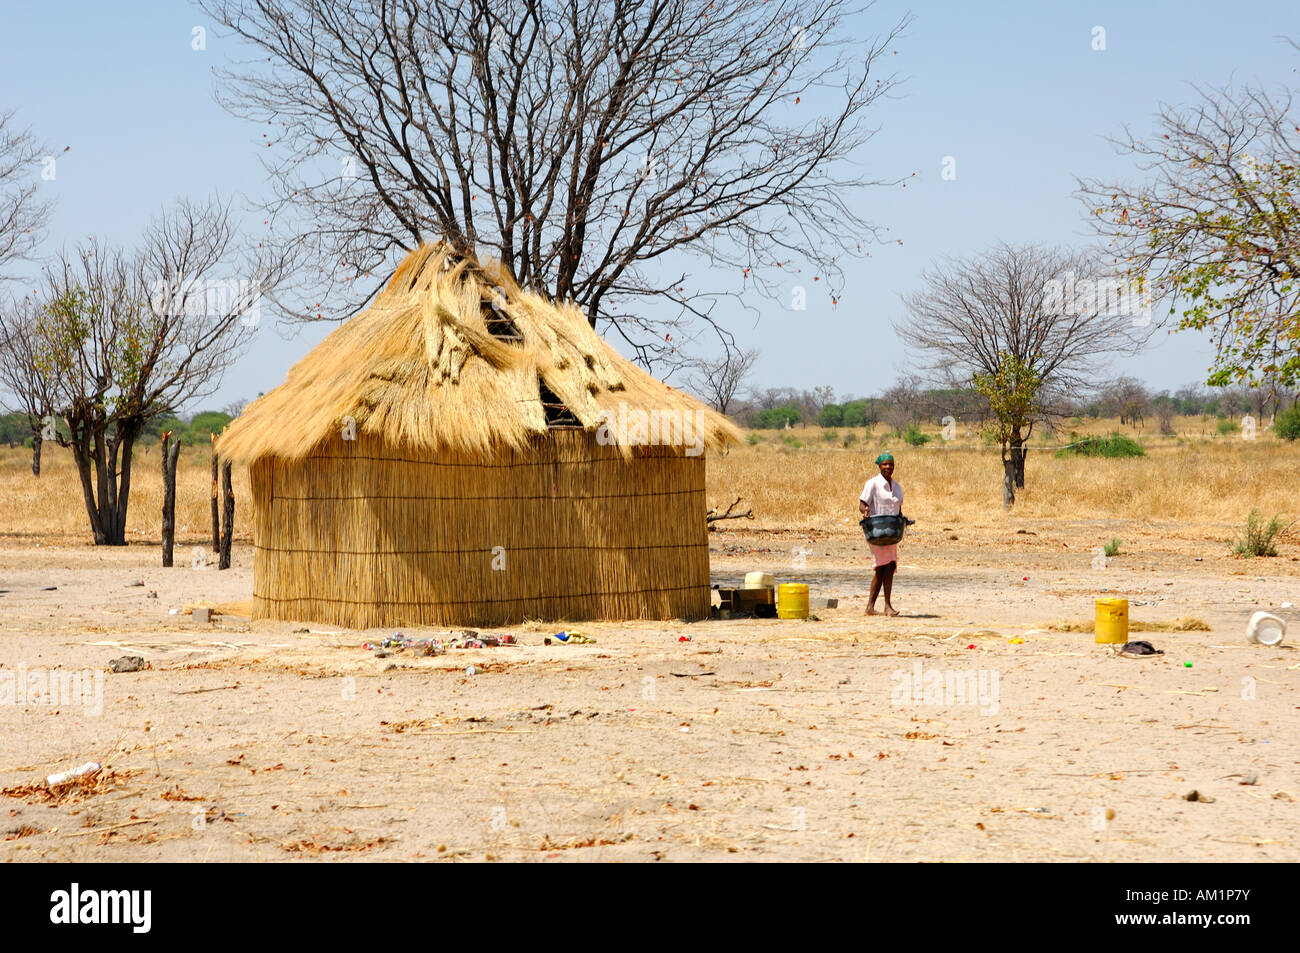 Local woman near a typical thatched-roof African round hut, Botswana Stock Photo